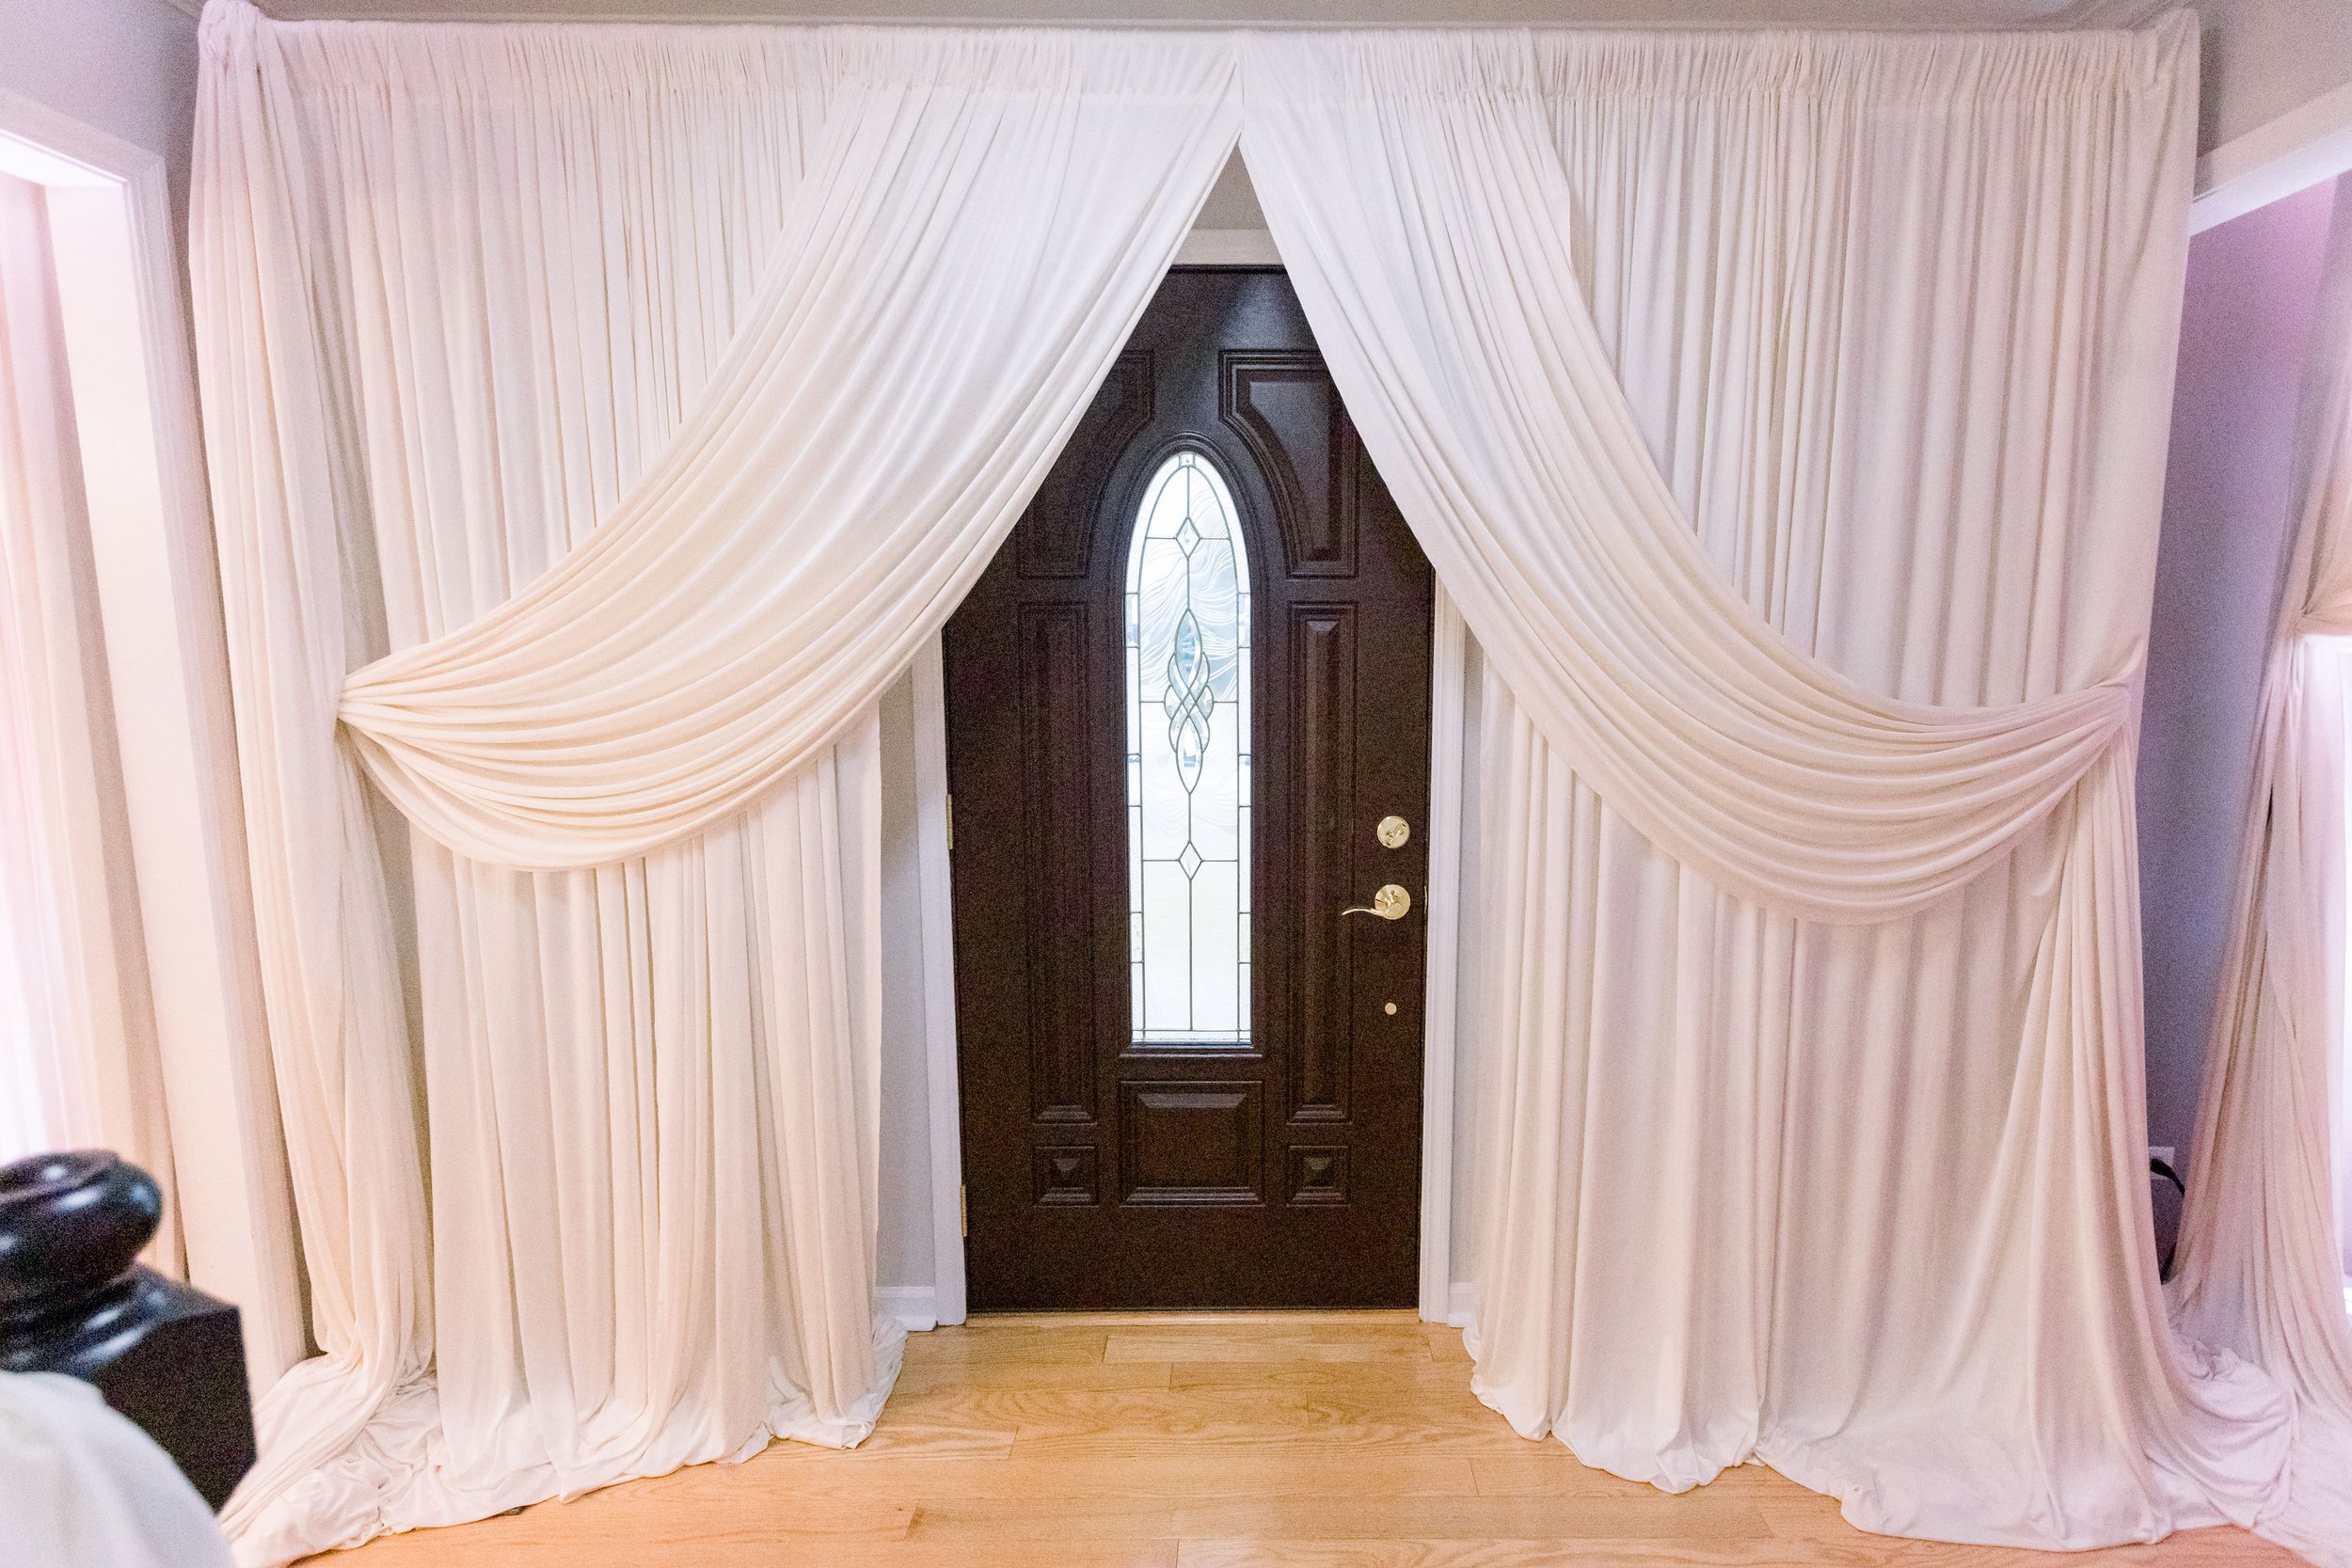 Basement wall draping wedding in the living room garage wall draping intimate wedding at home micro wedding event in chicago chiavari chairs table ren (12).jpg